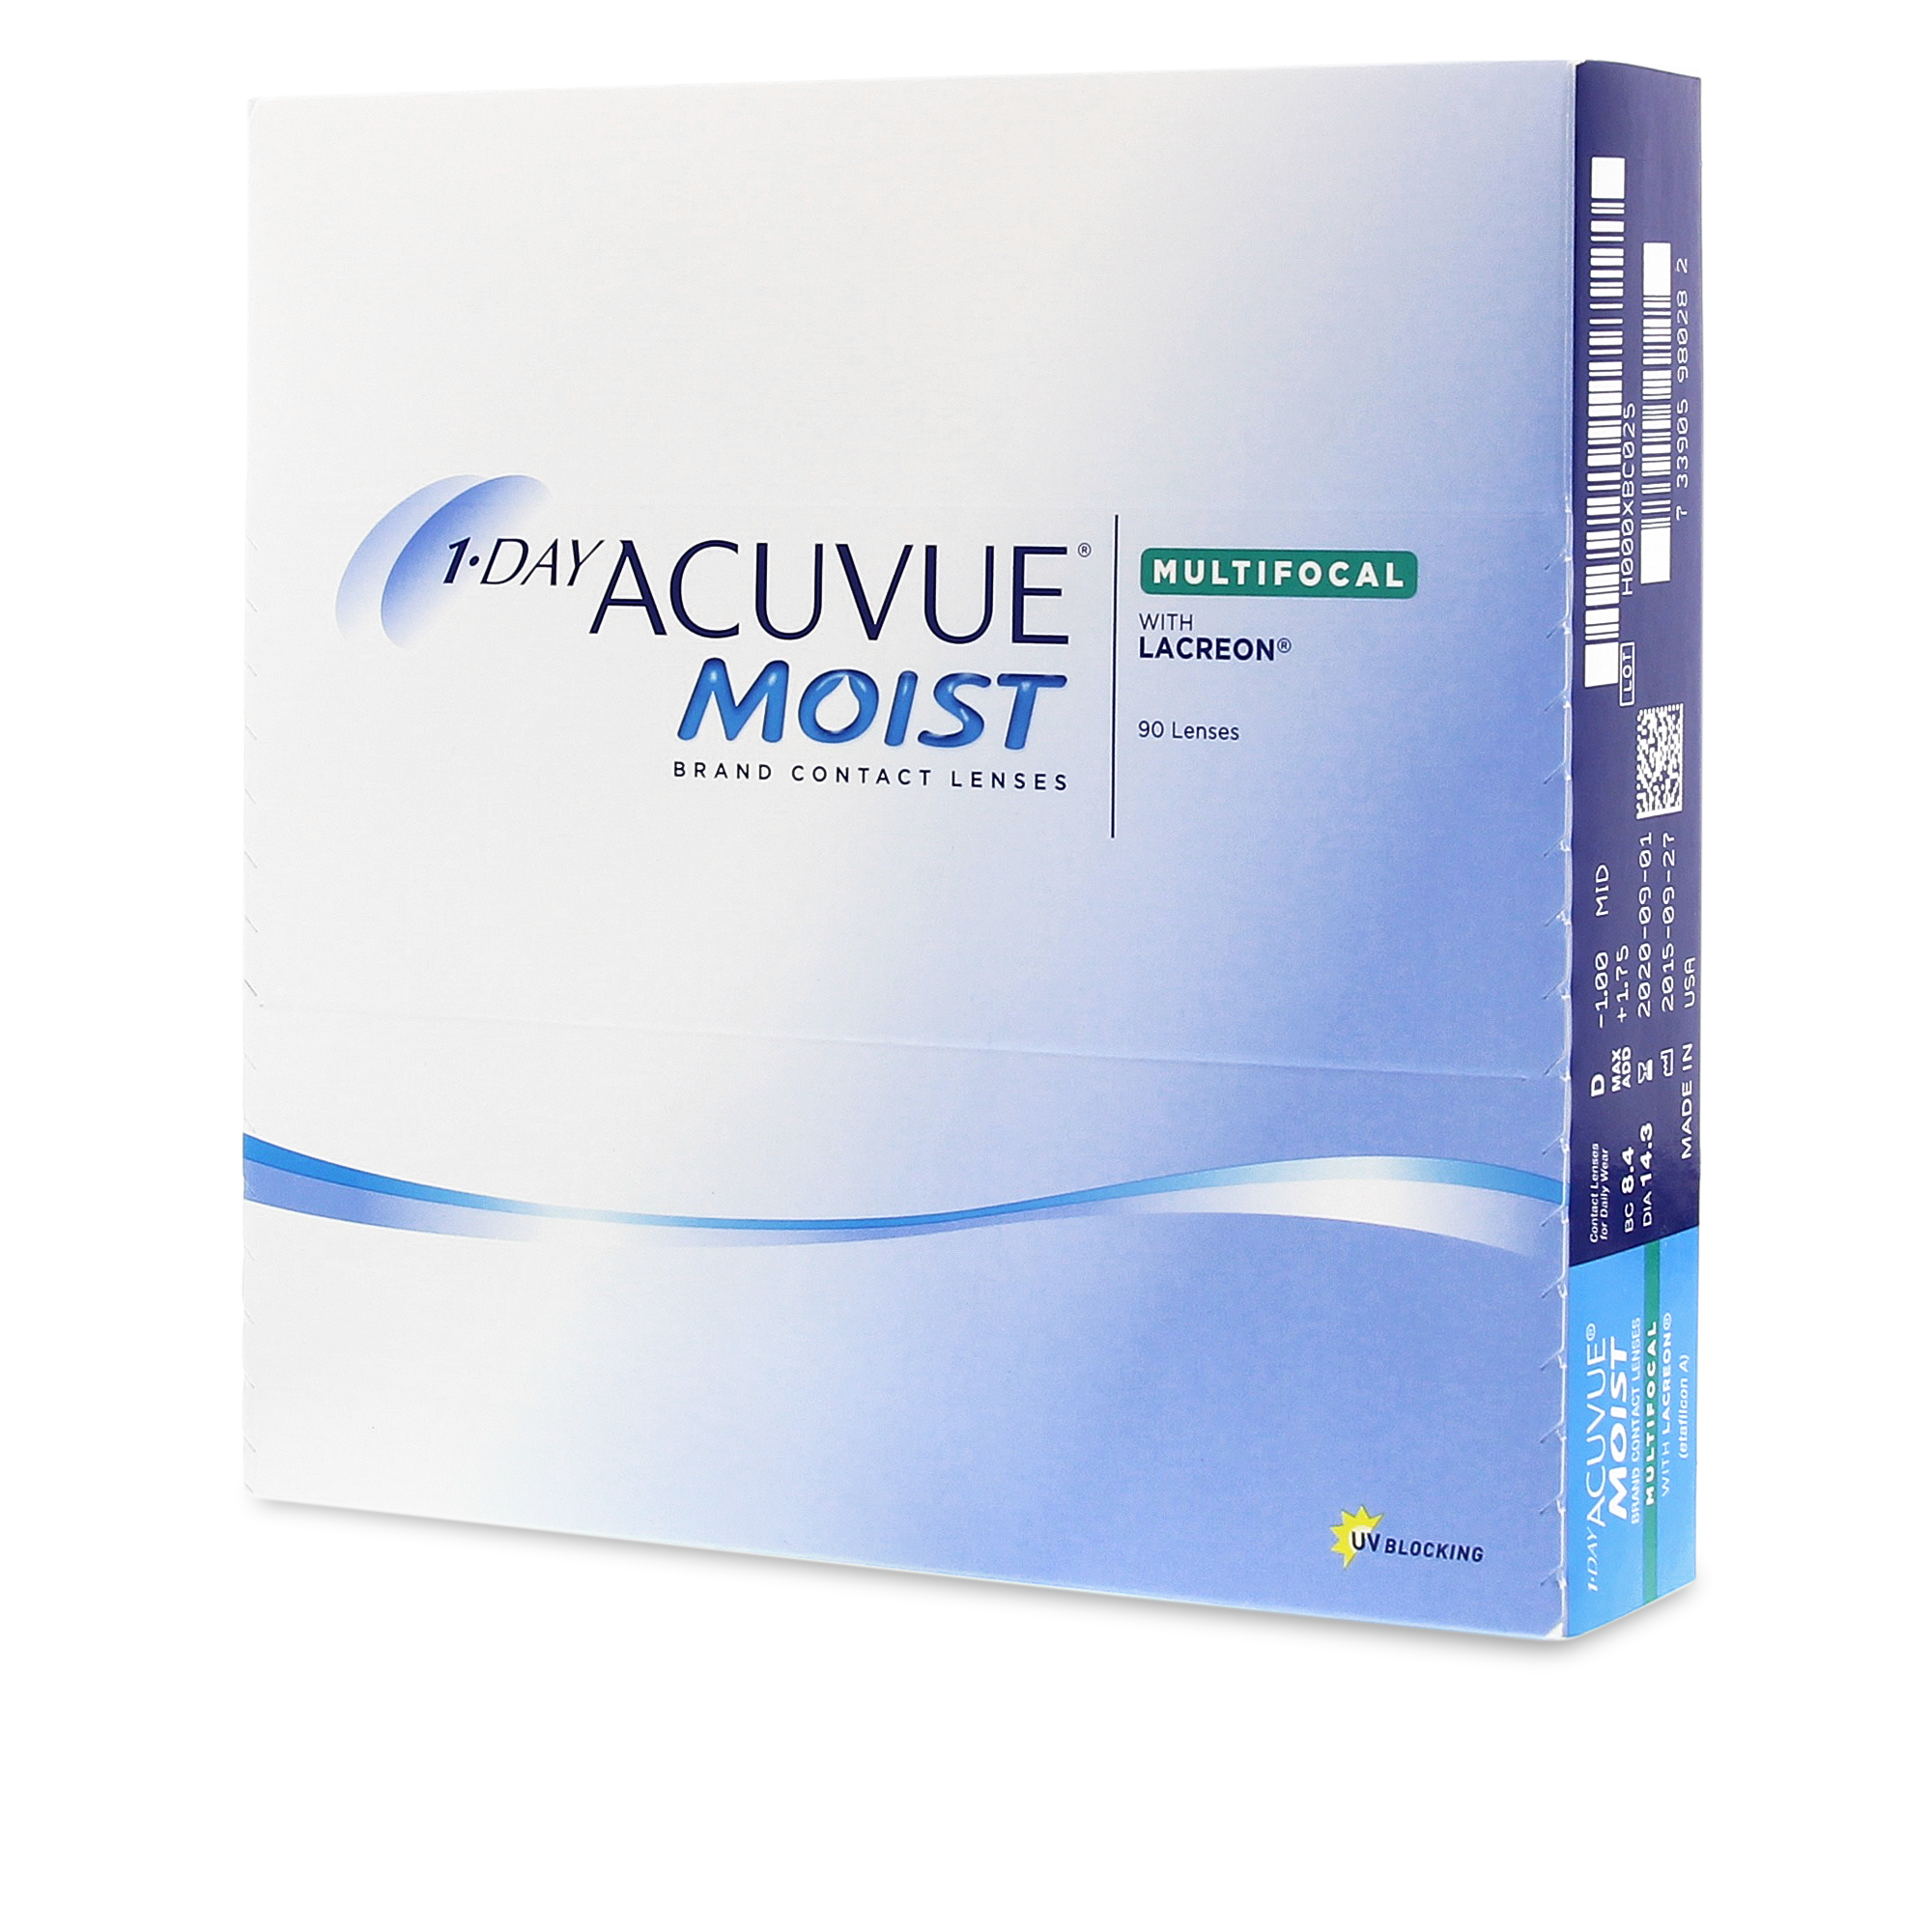 Acuvue Moist Multifocal Review